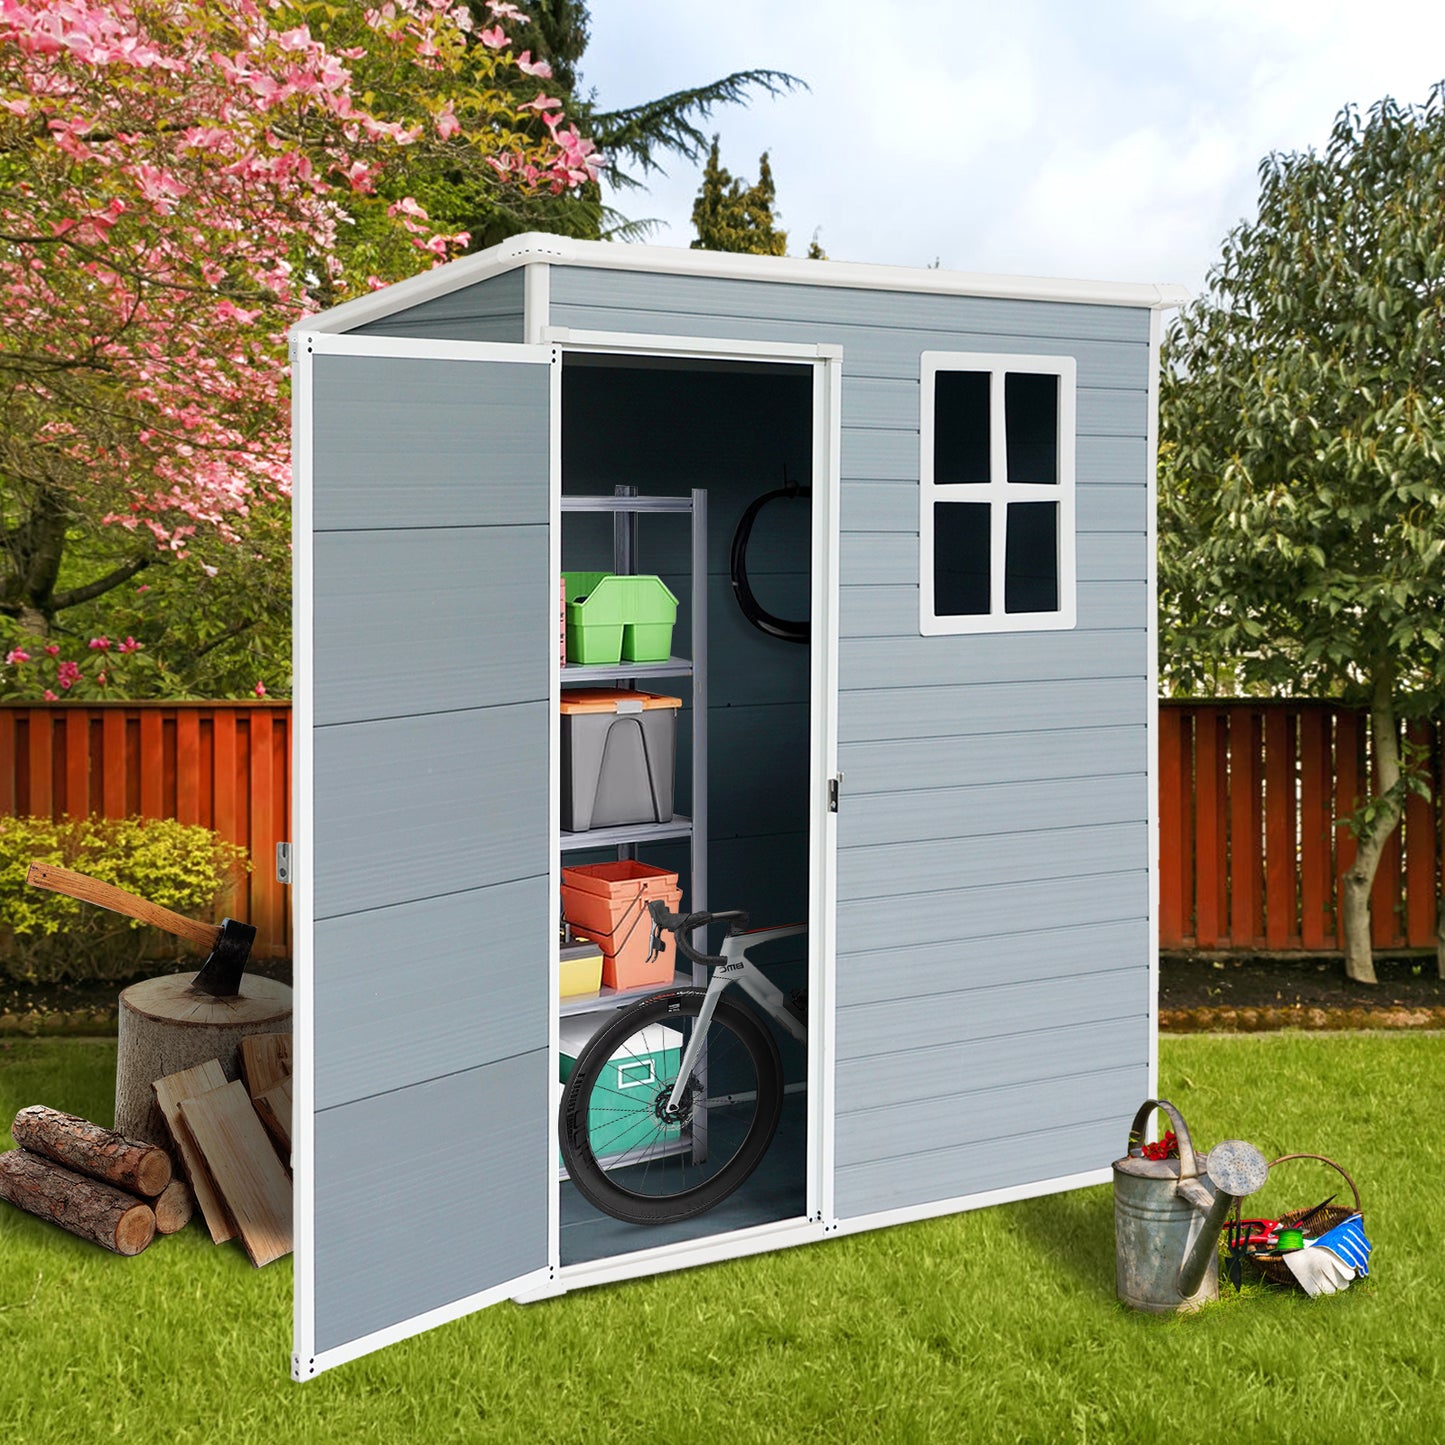 SYNGAR 6' x 4' Outdoor Storage Shed, Metal Garden Shed with Lockable Doors, Tools Storage Shed for Backyard, Patio, Lawn, D9094